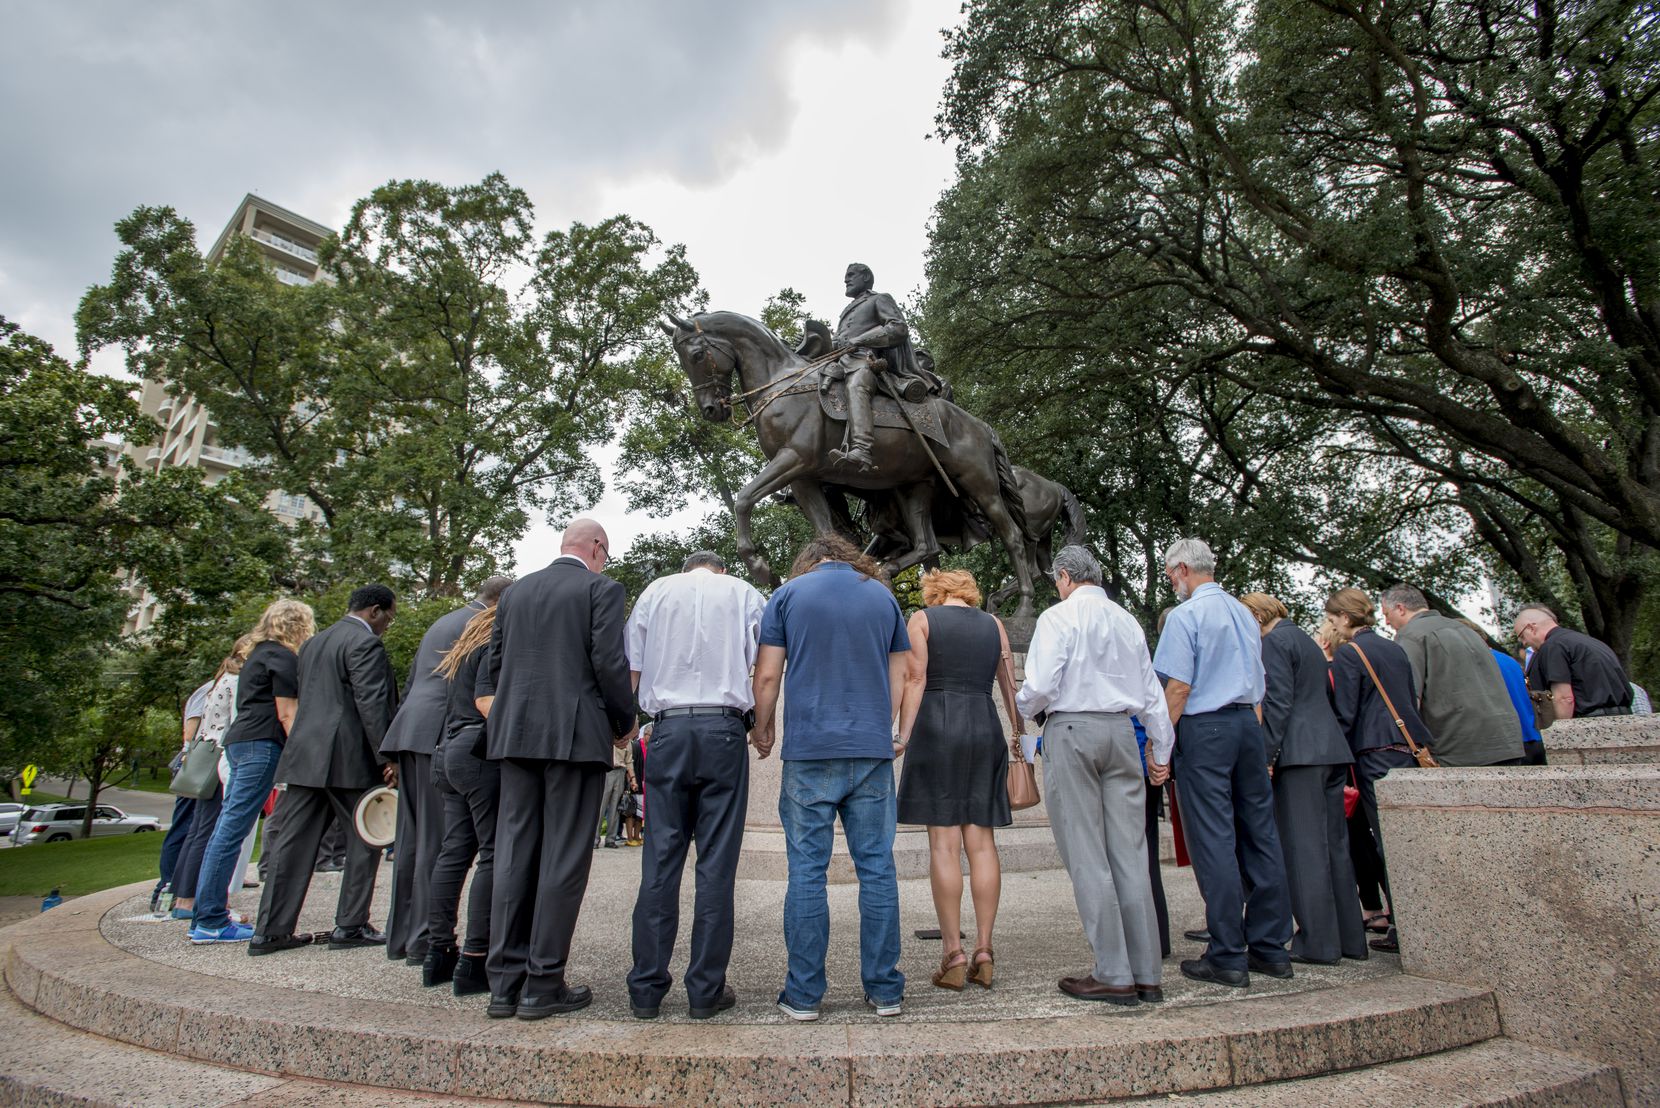 Dallas-area ministers join hands around the statue of Robert E. Lee to pray for its removal...